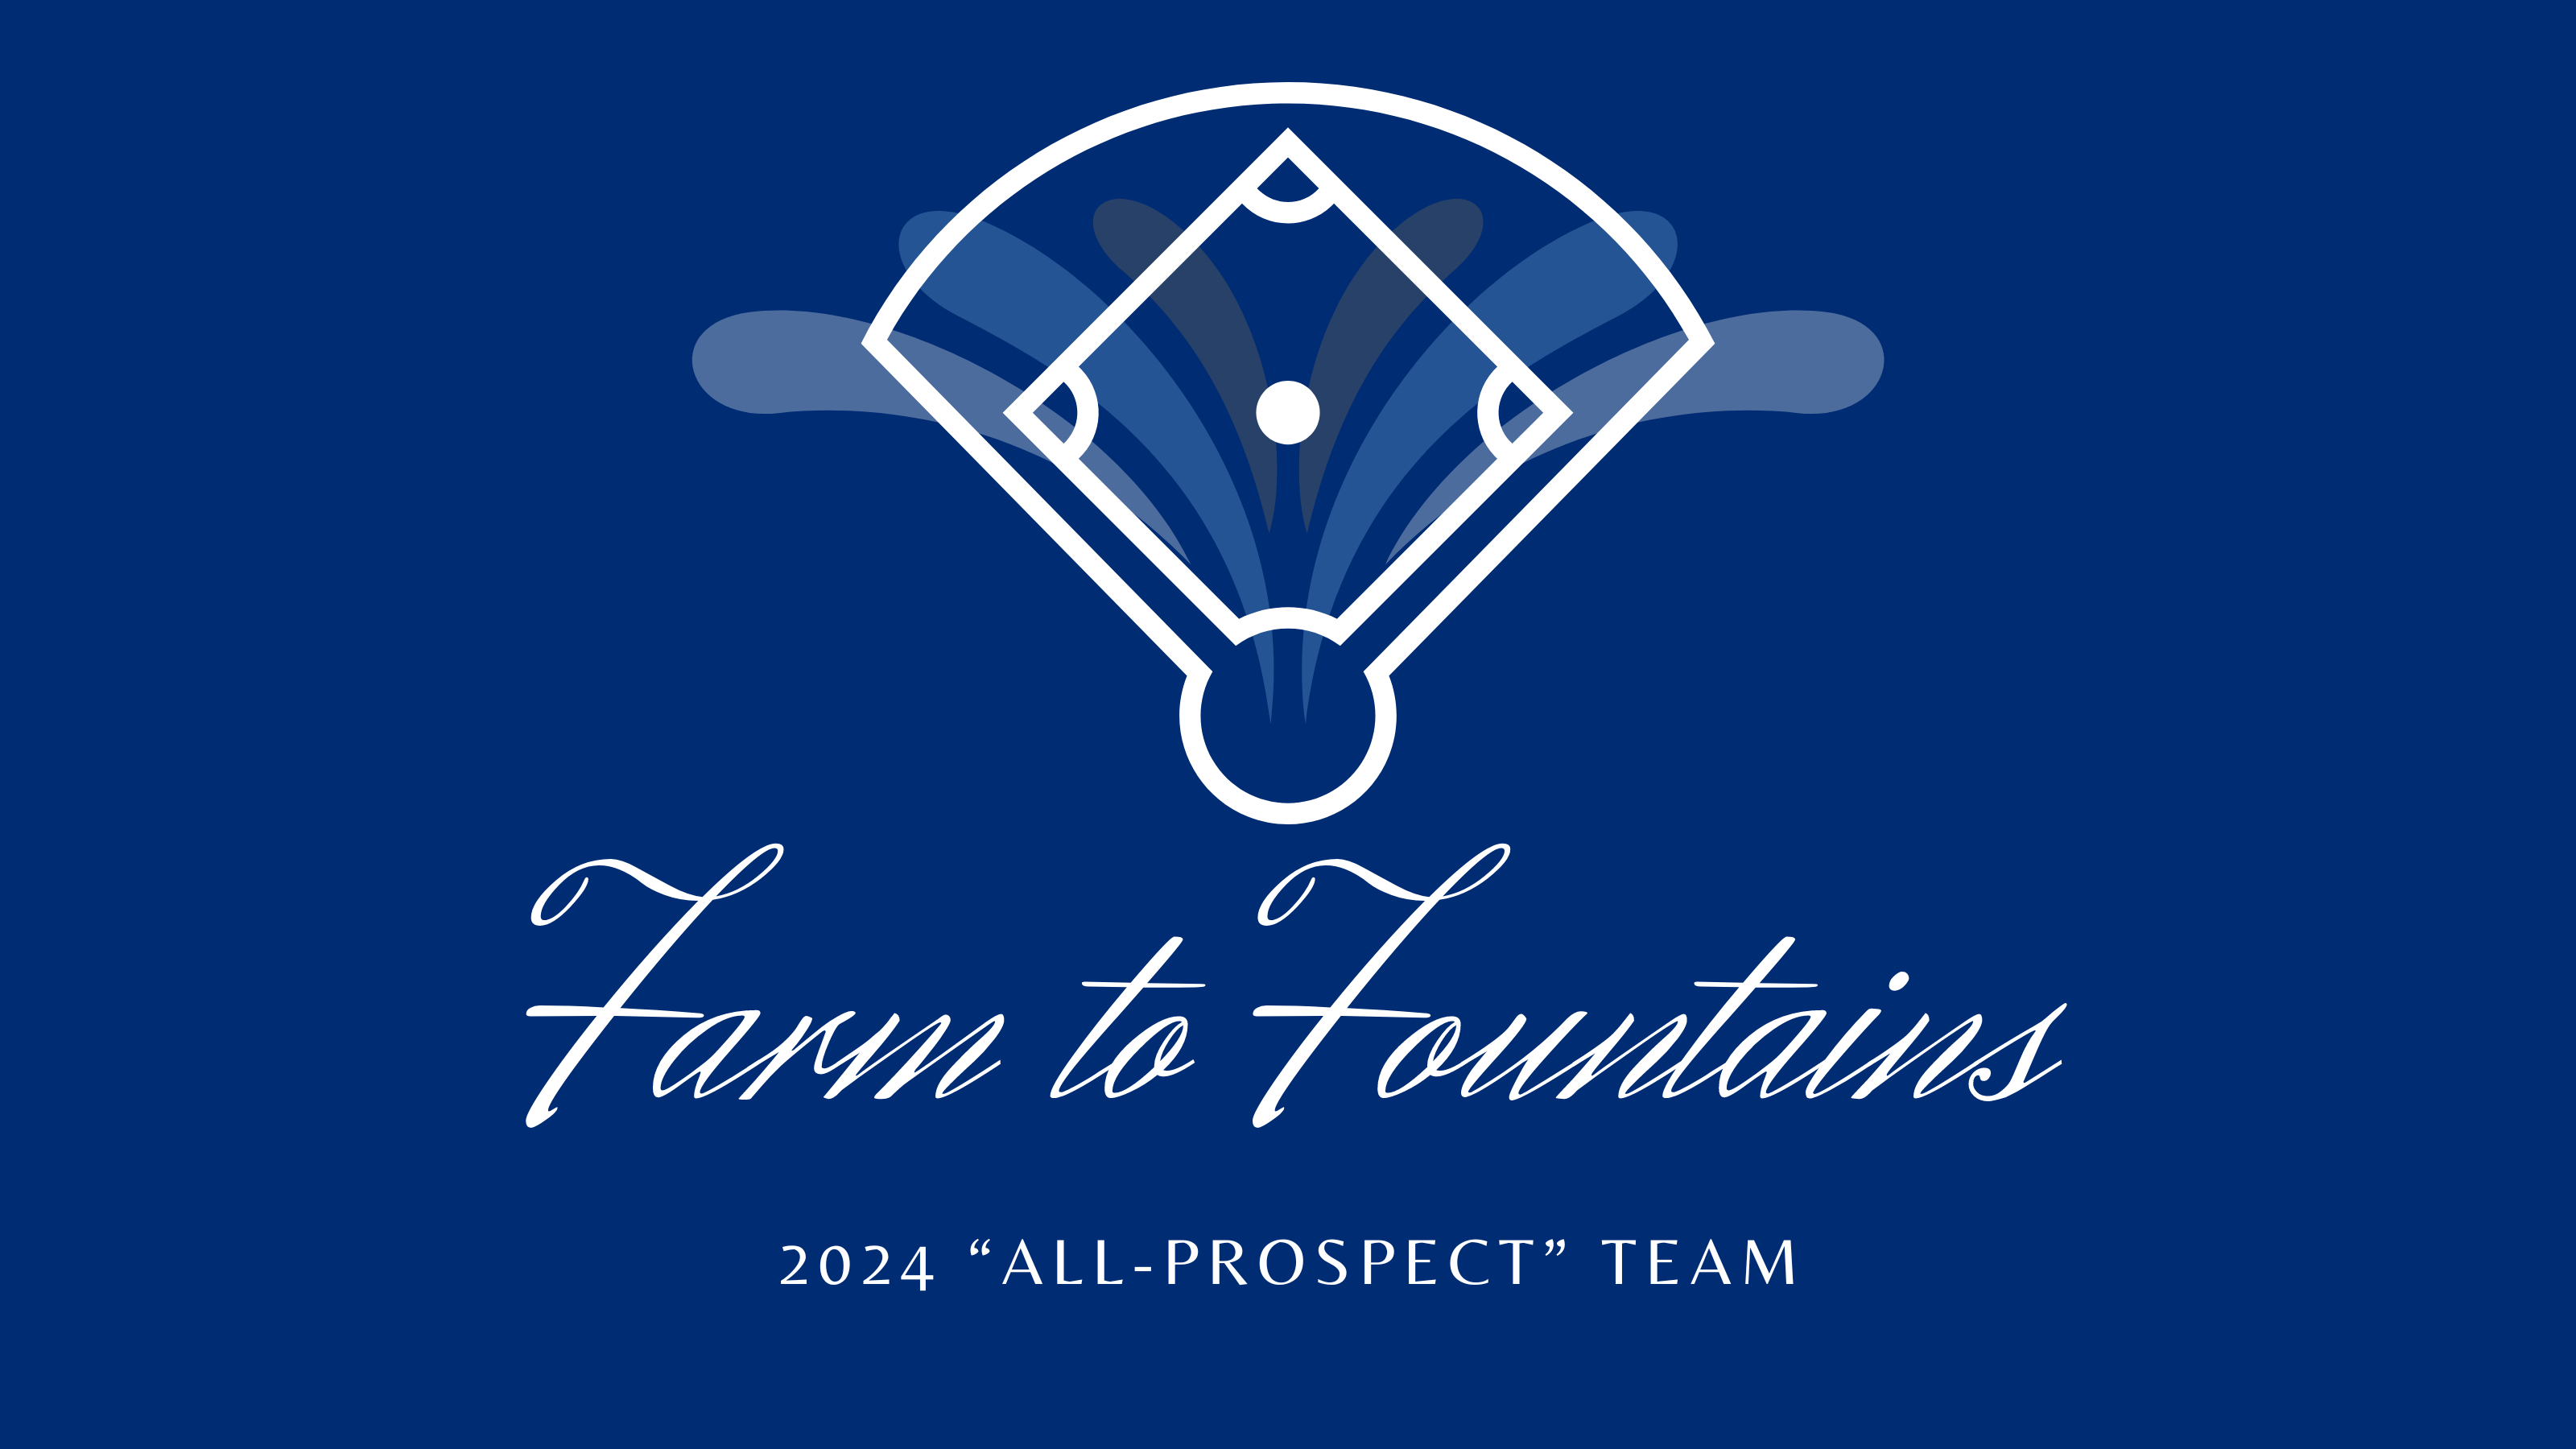 A Look at the 2024 Royals "AllProspect" Team Farm to Fountains